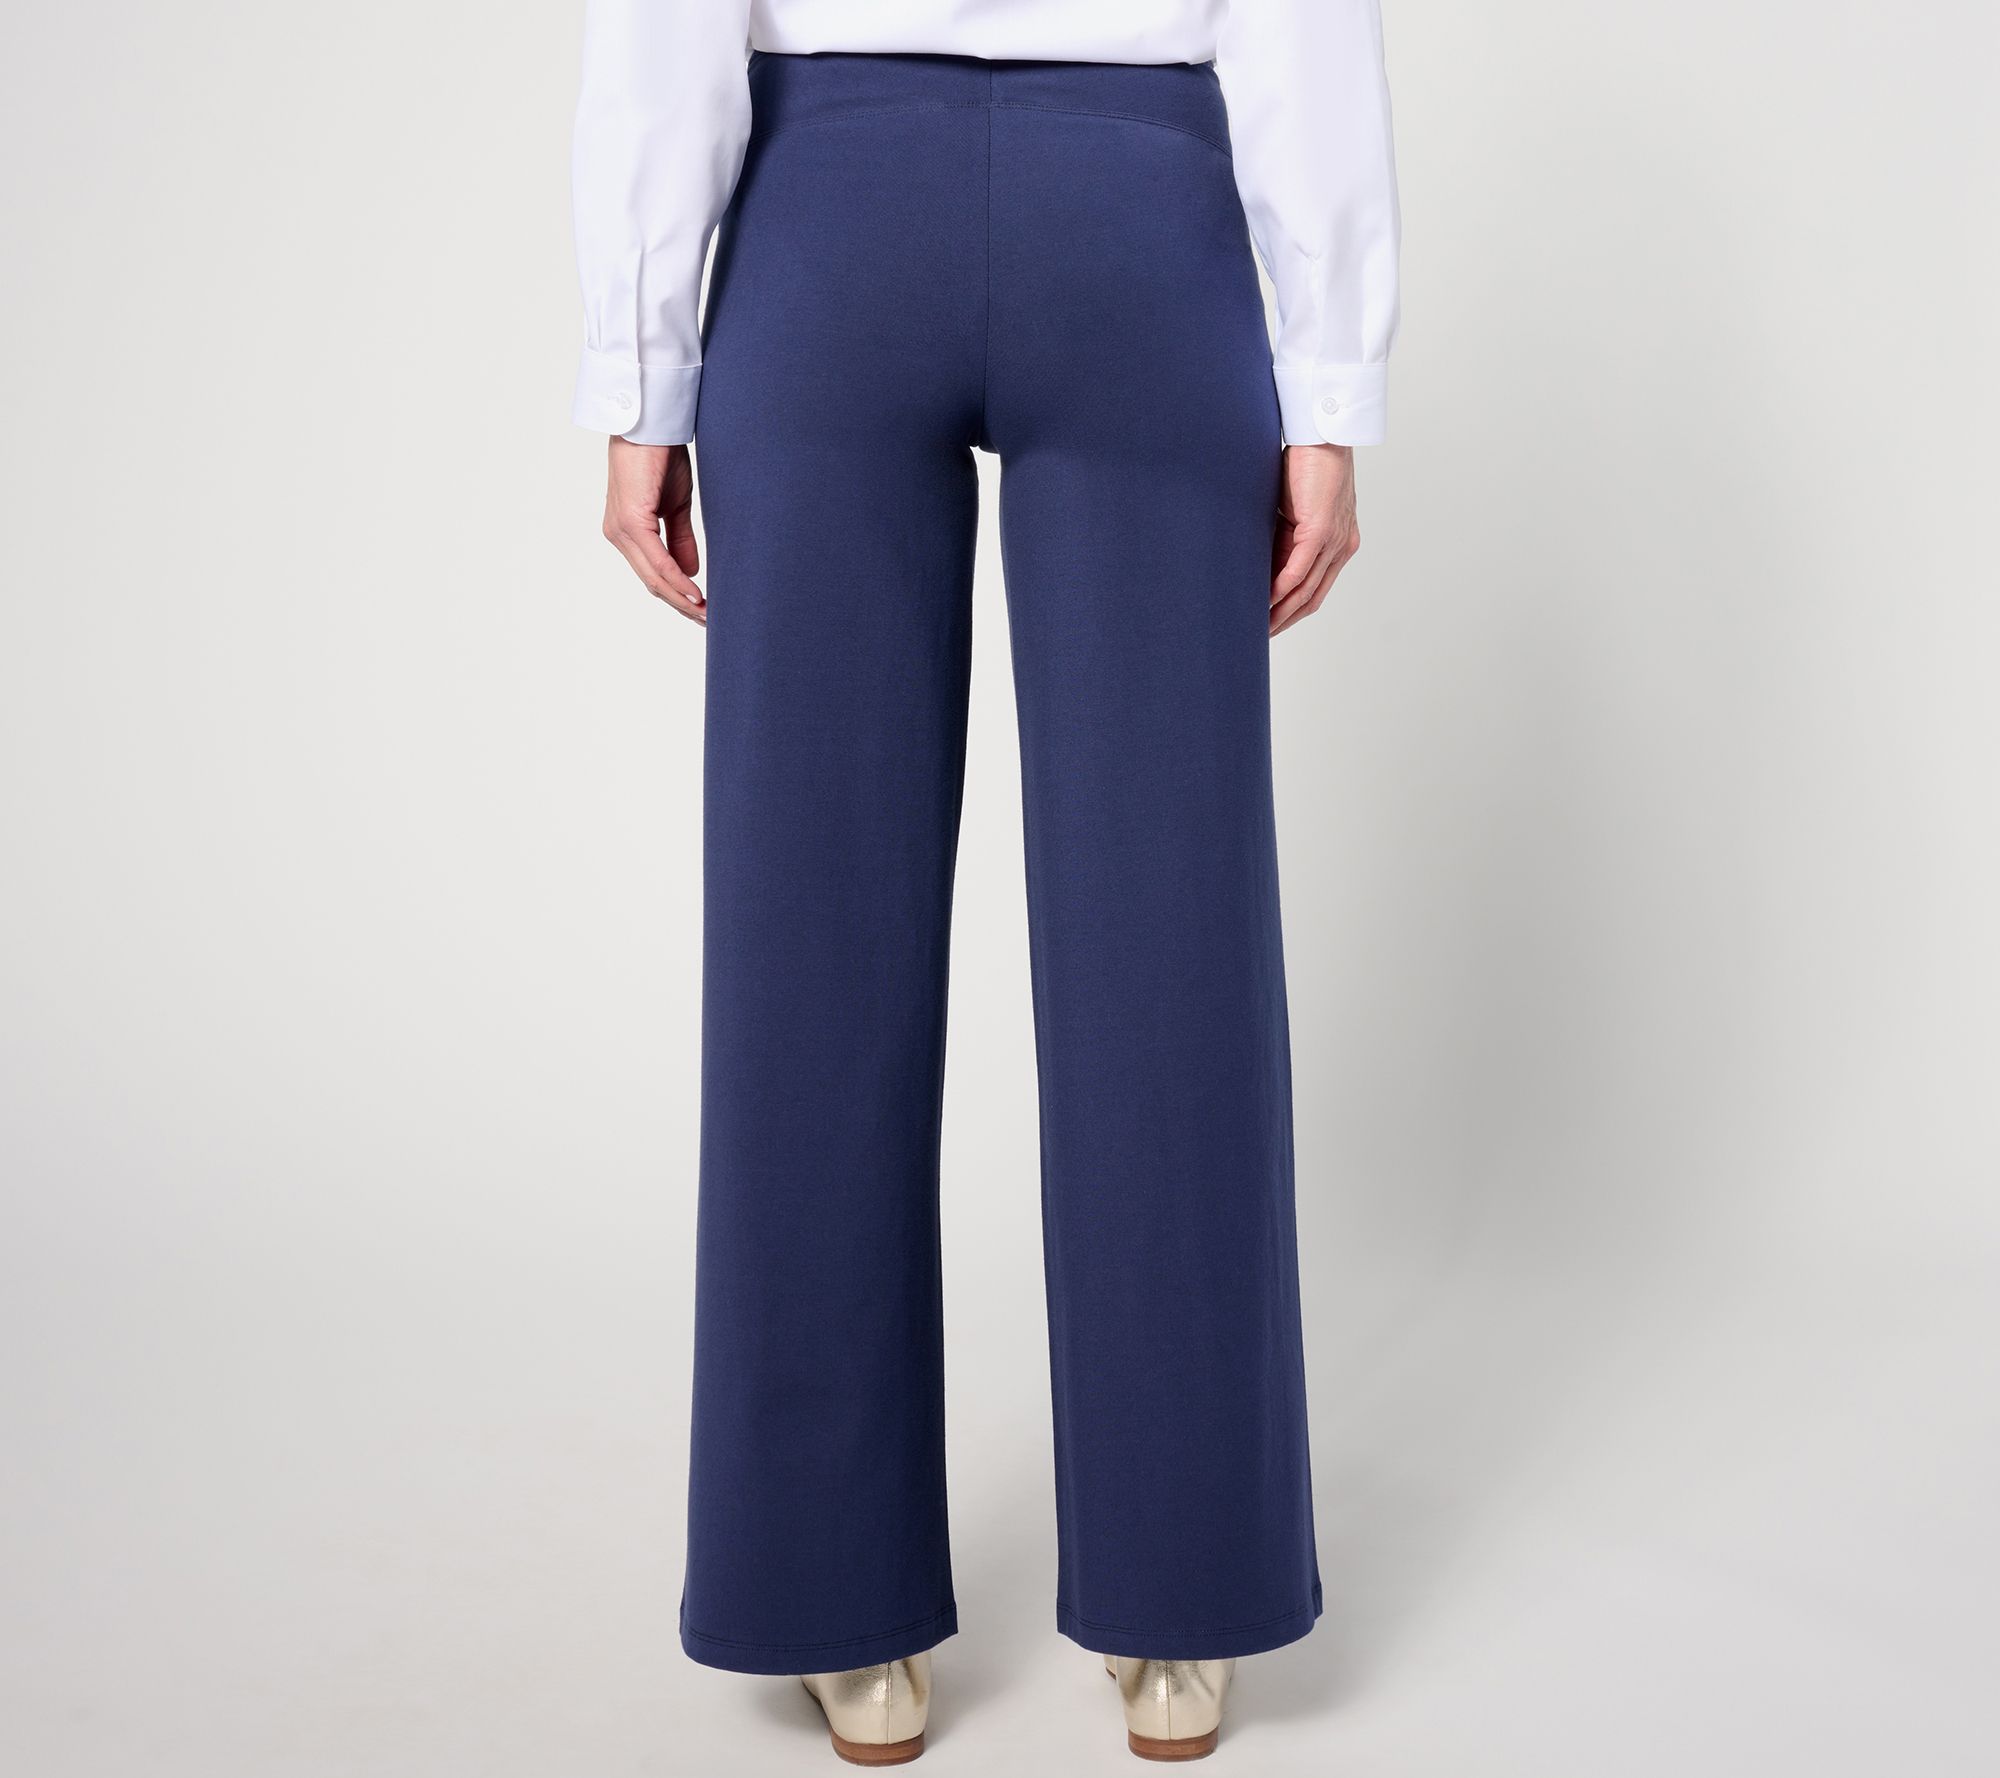 Curvy Tummy Control Work Pants with Real Pockets - ShopperBoard